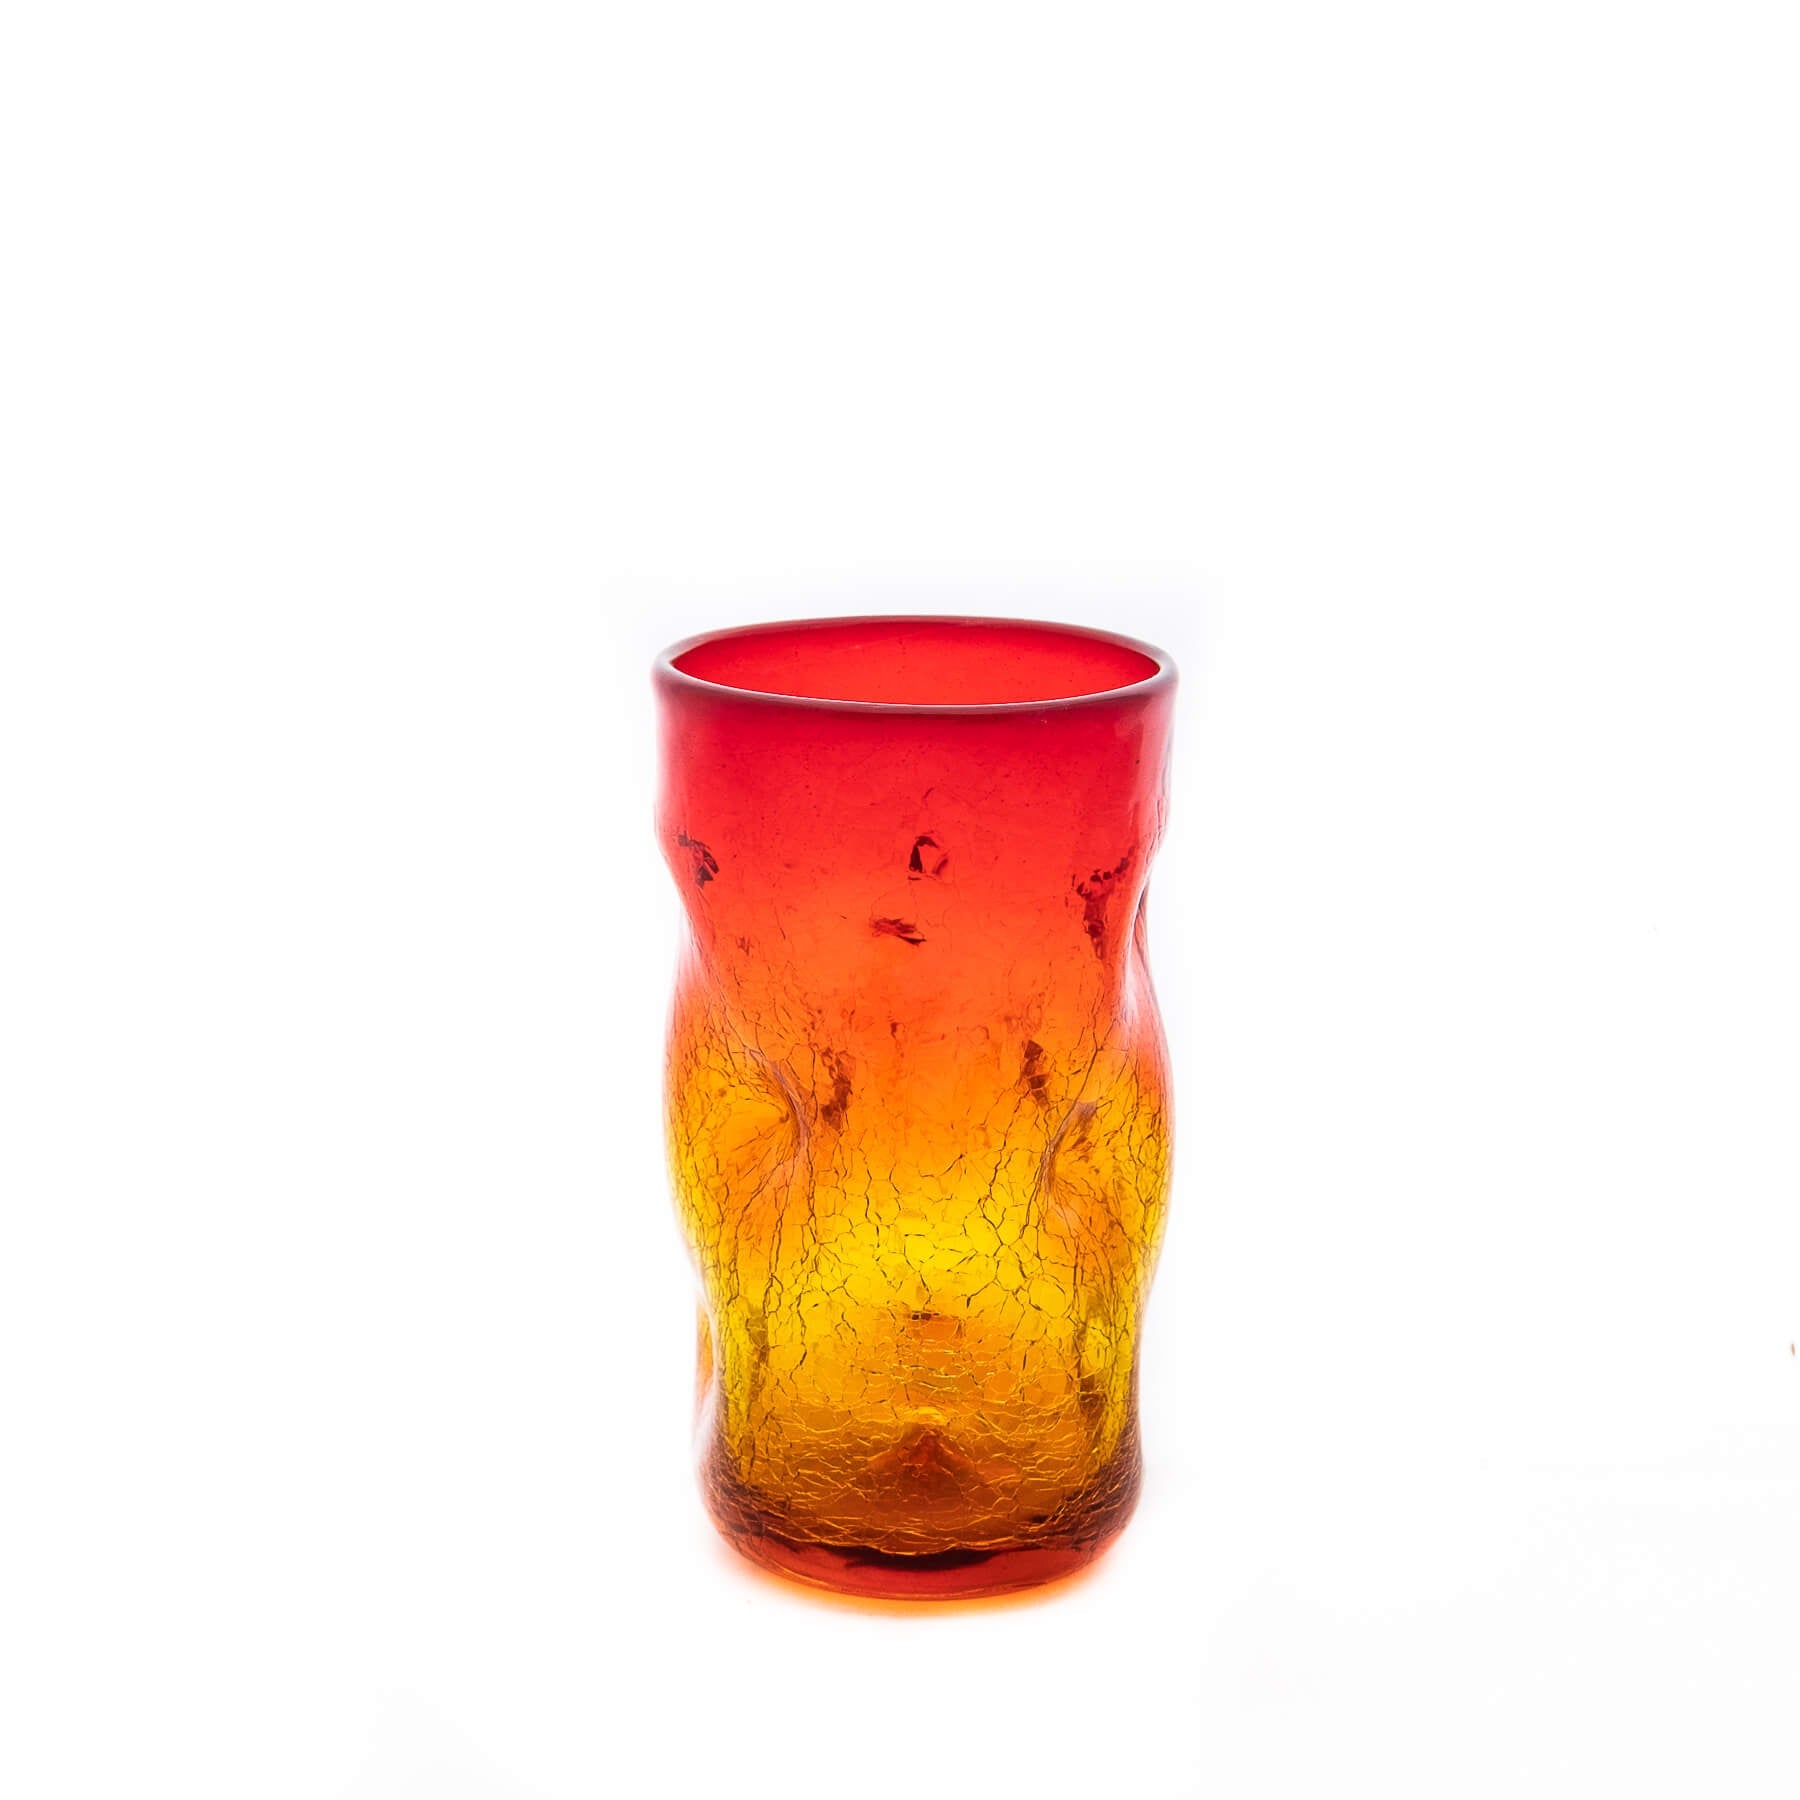 Product photo for Blenko 418LC Crackled Large Dimple Glass - Tangerine